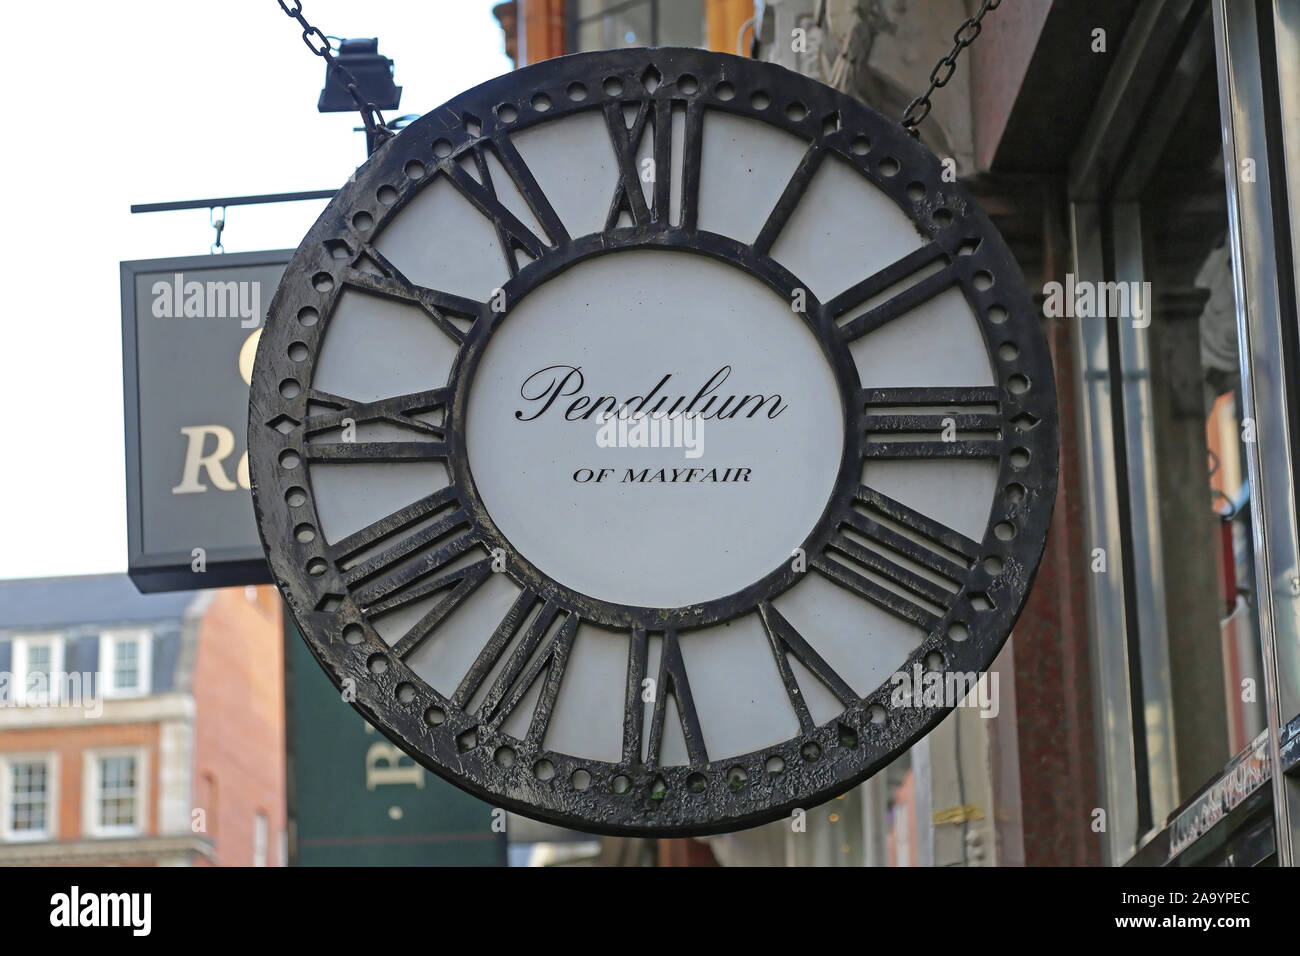 London, United Kingdom - November 21, 2013: Pendulum of Mayfair Antique Clocks and Furniture Specialists at Maddox Street in London., UK. Stock Photo